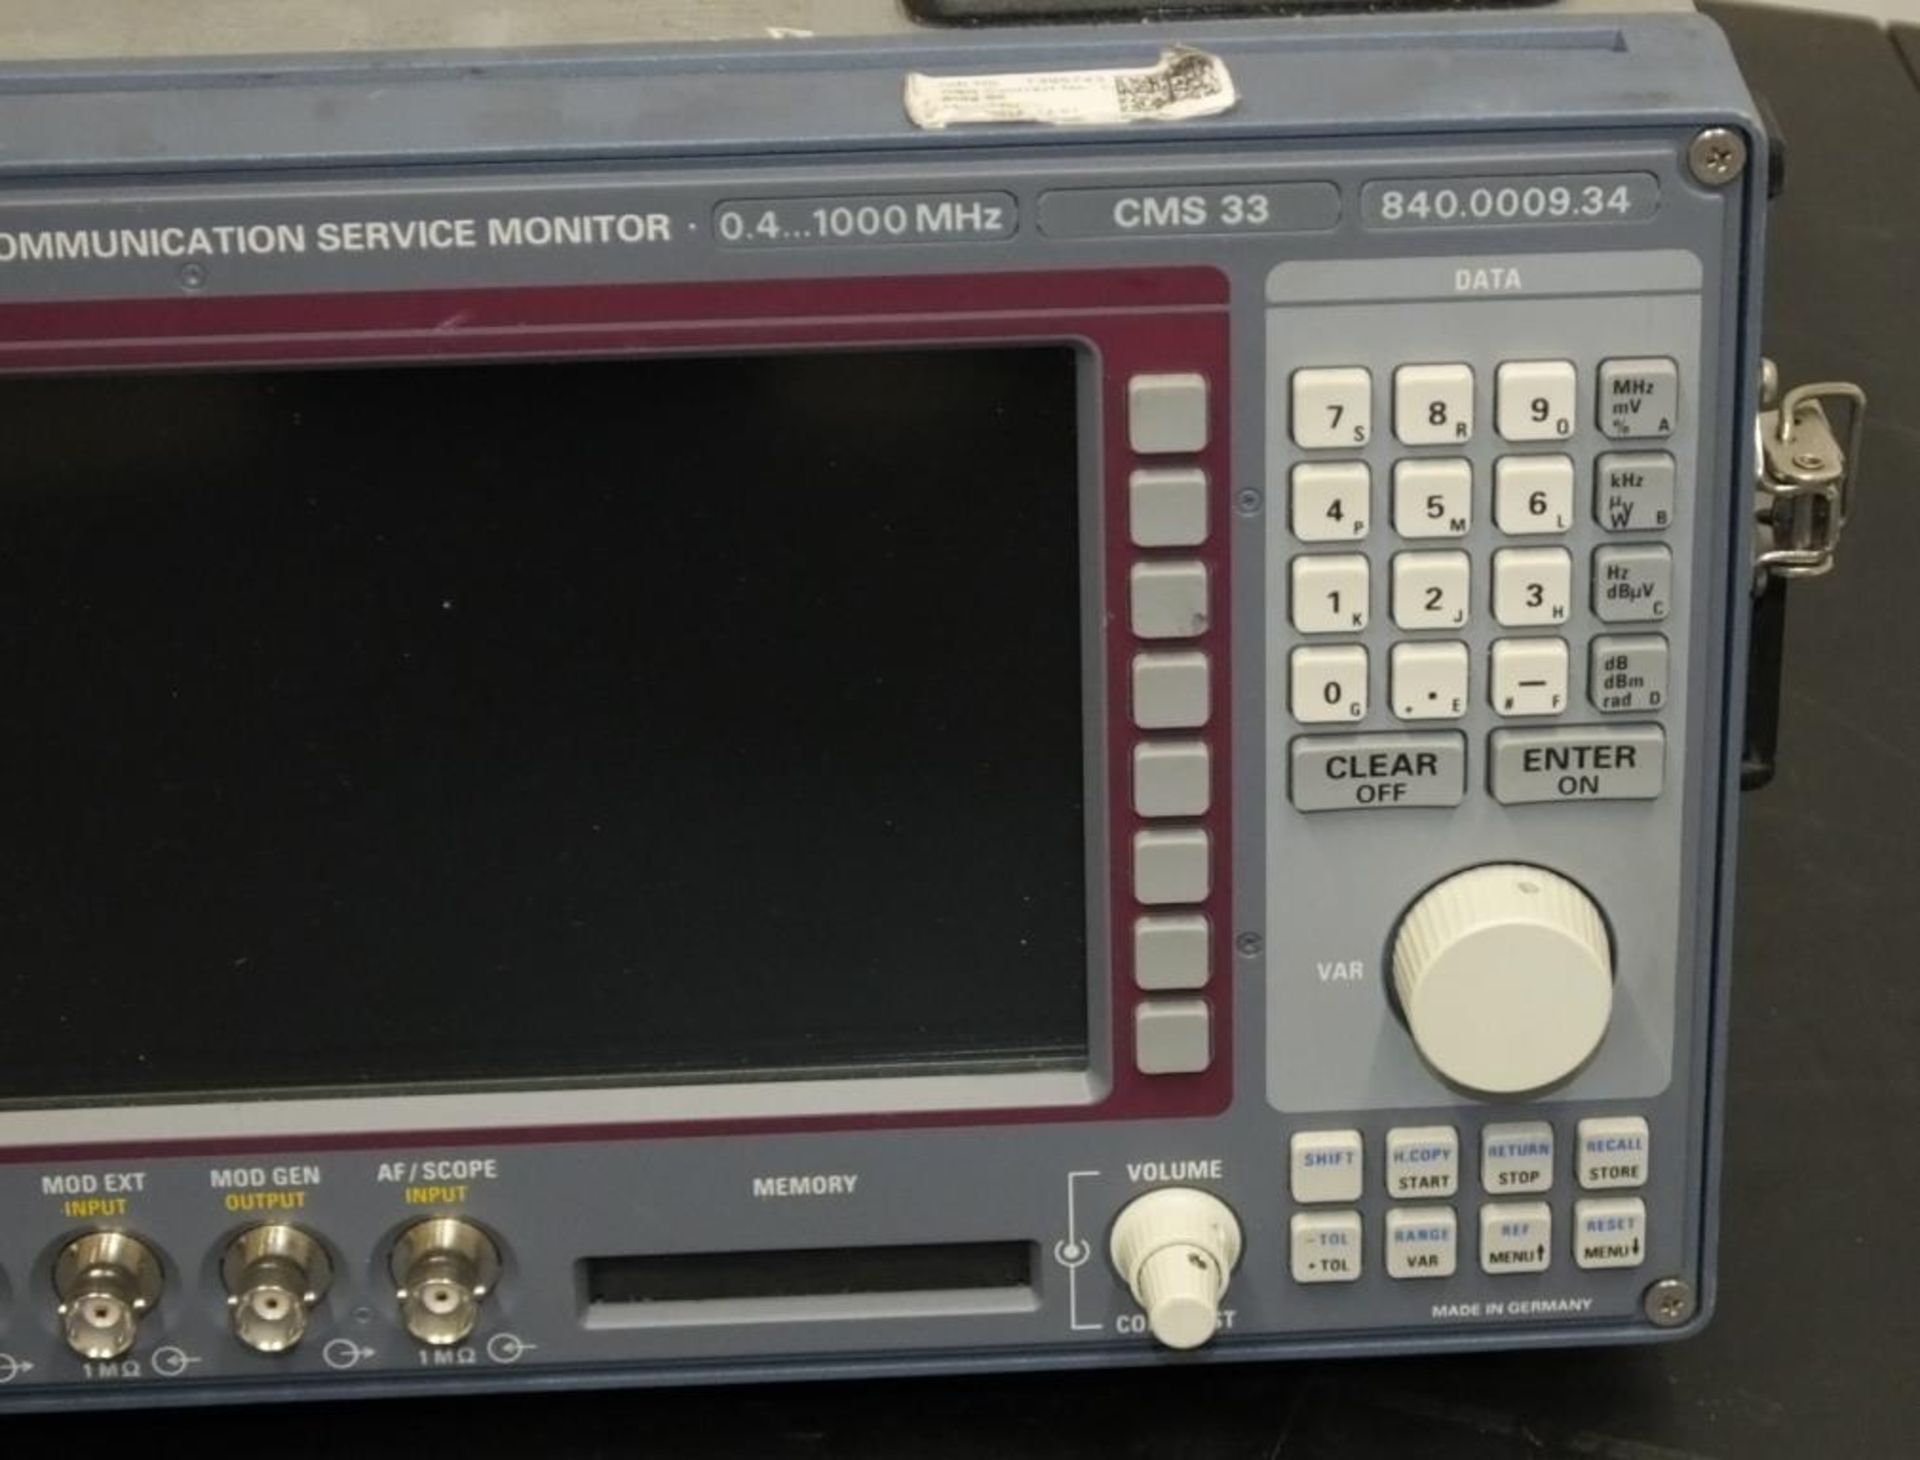 Rohde & Schwarz Radio Communications monitor 0.4 - 1000mhz - CMS33 - 840.0009.34, antenna base in co - Image 4 of 9